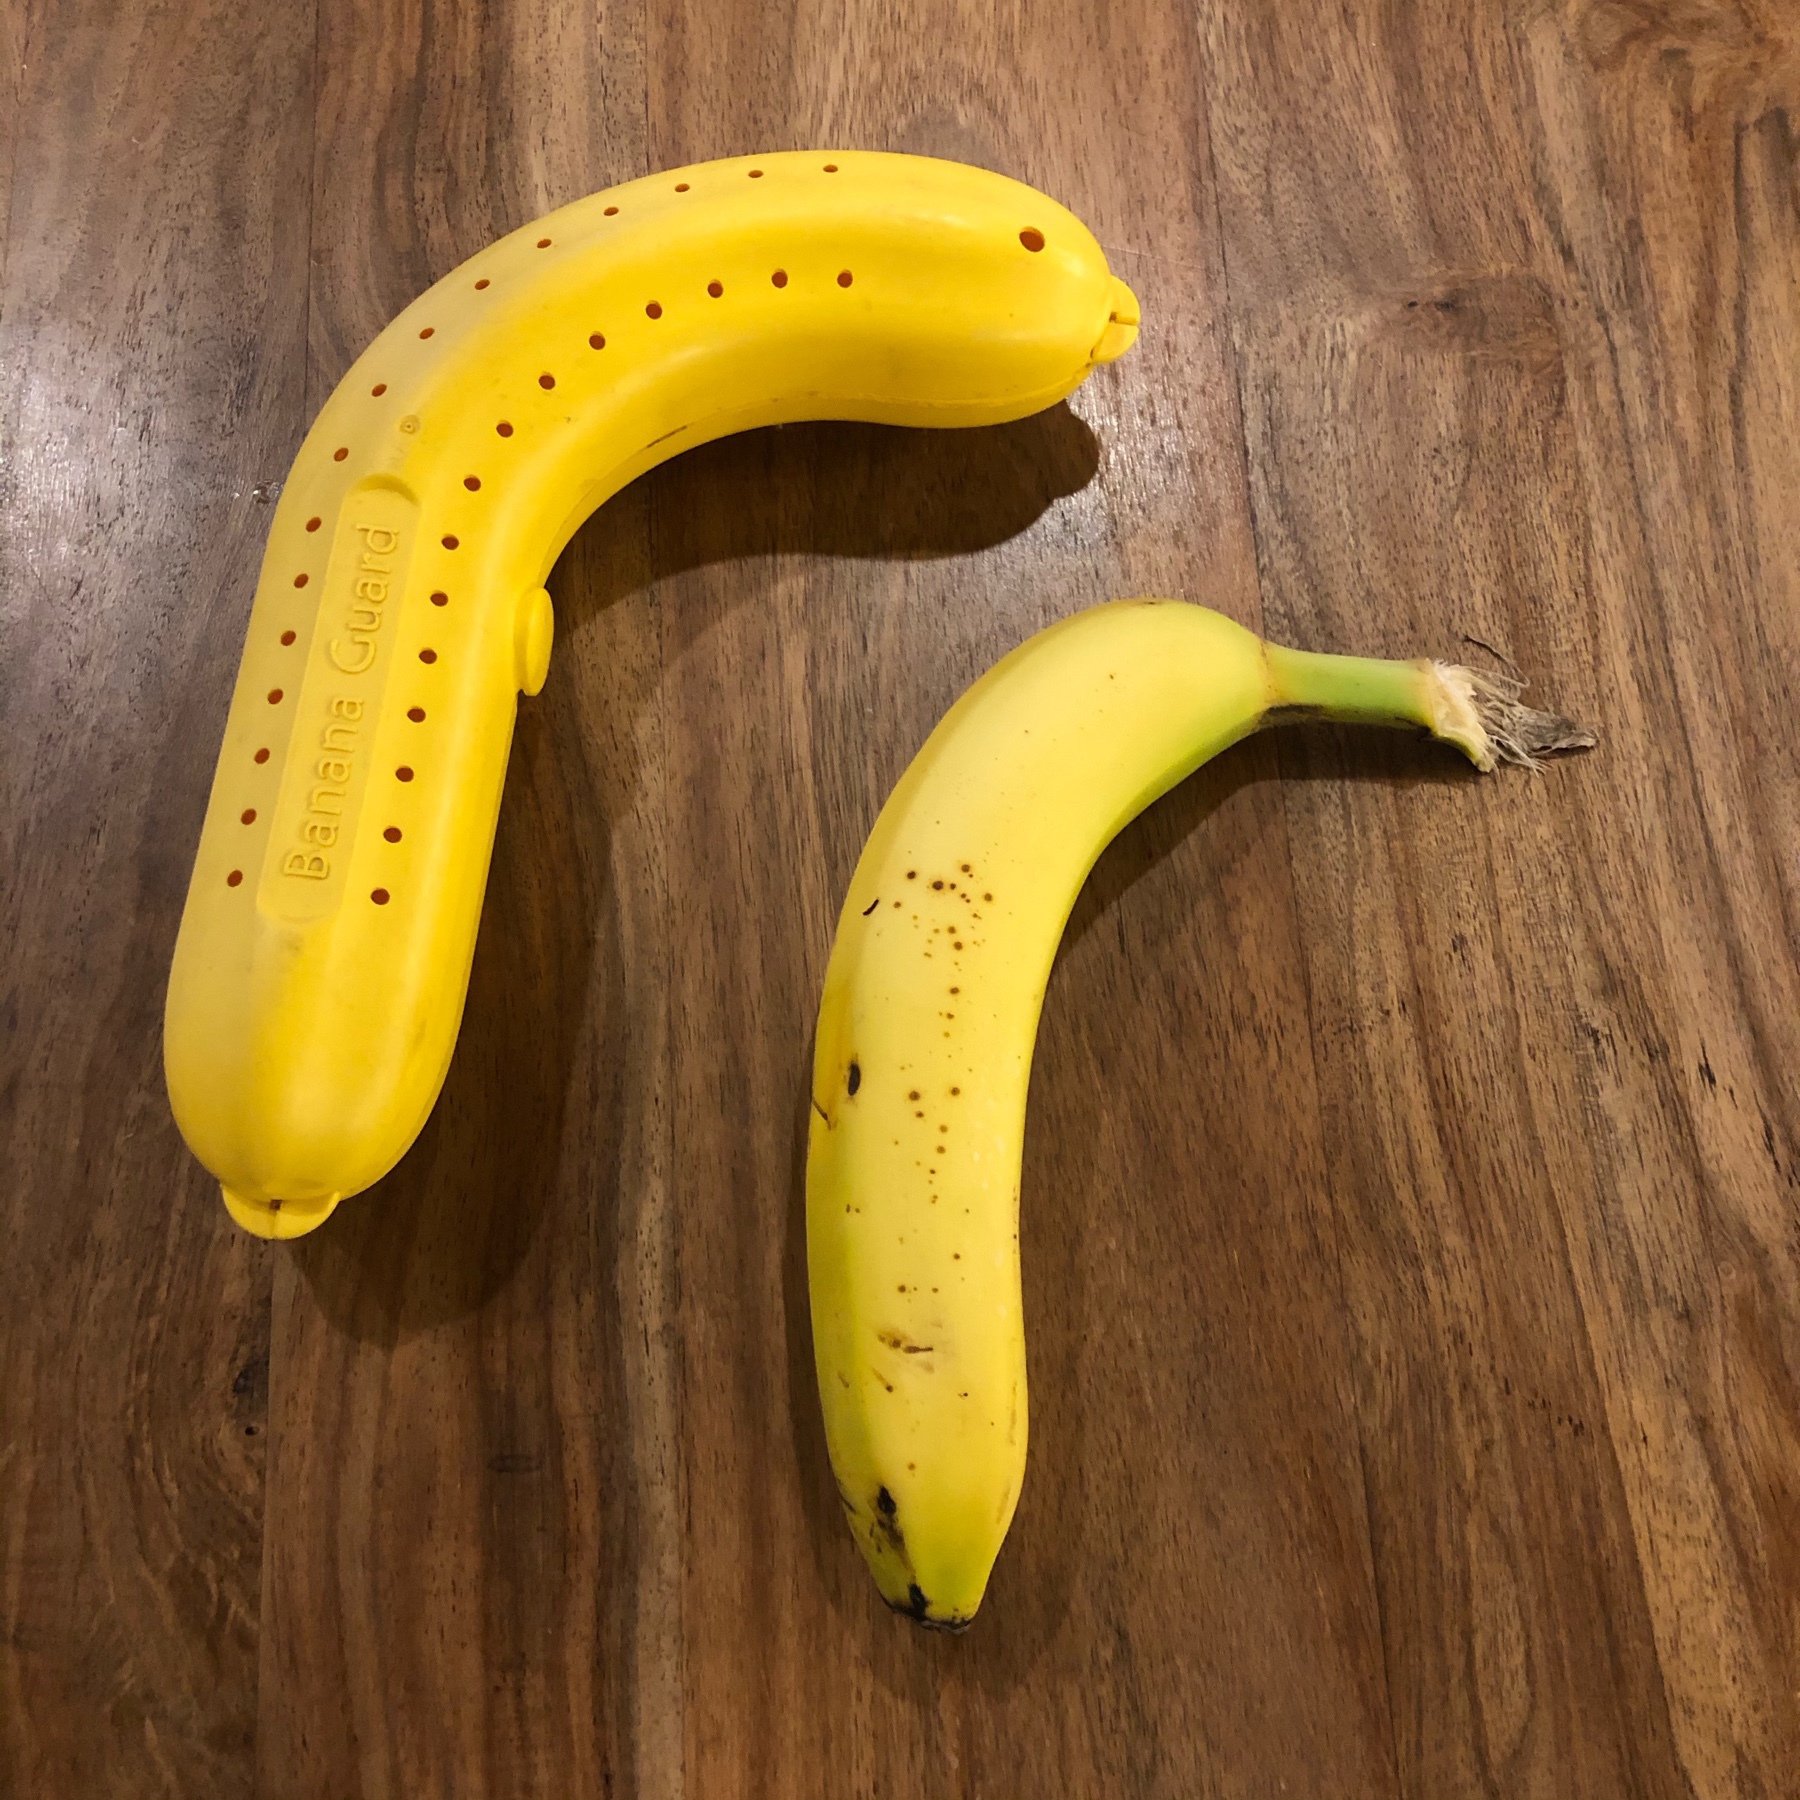 a yellow, plastic, banana-shaped container and a banana